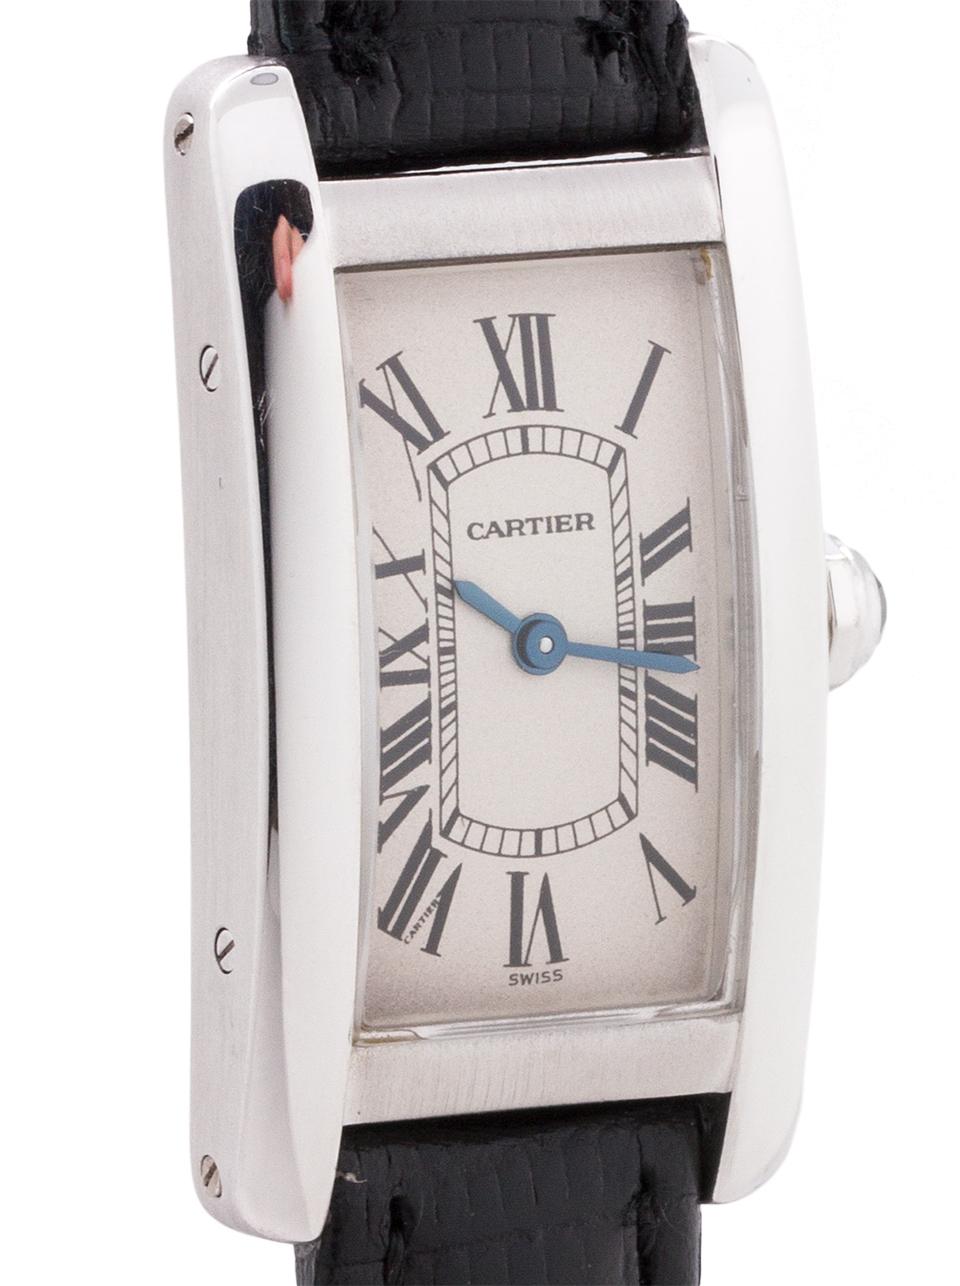 Classic Cartier lady’s 18K white gold Tank American ref 1713 circa 1990’s. Featuring classic curvex style 20 X 35mm case secured by 4 side screws and 8 caseback screws. With original classic silvered dial with Roman figures with Cartier “secret”